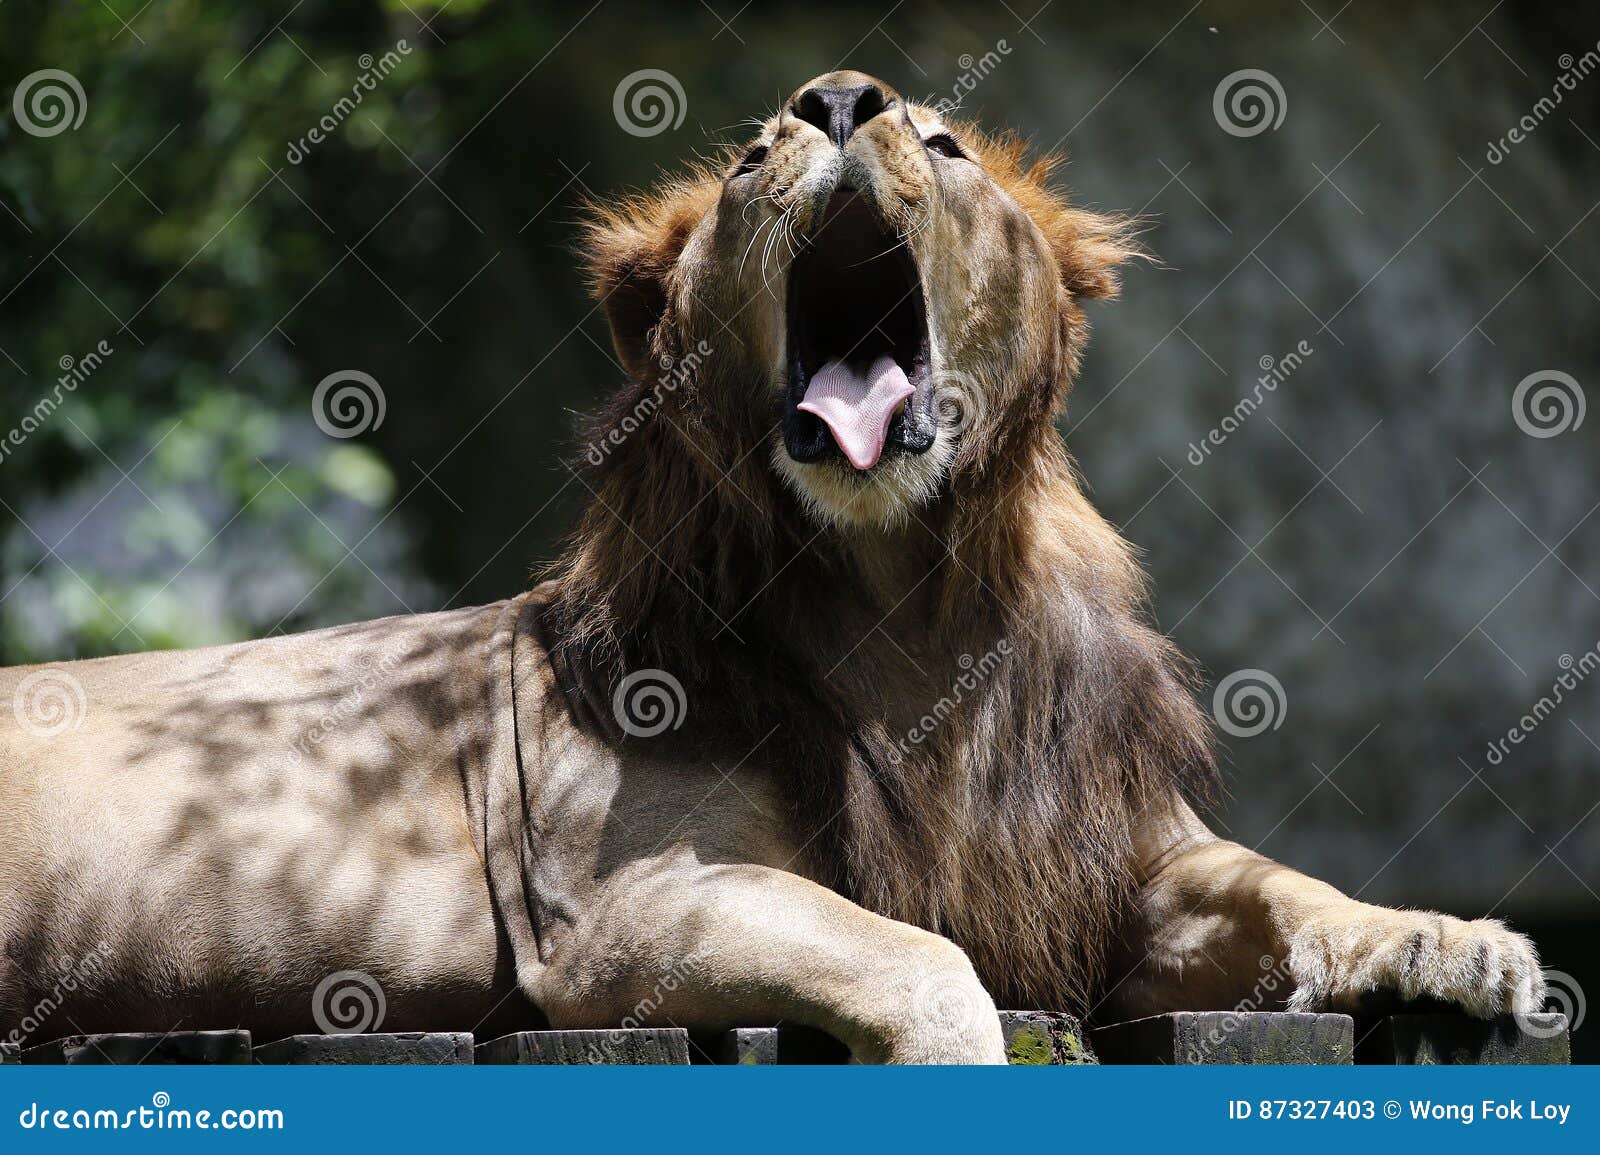 Lion in Malaysia National Zoo Stock Image - Image of lion, wild: 87327403